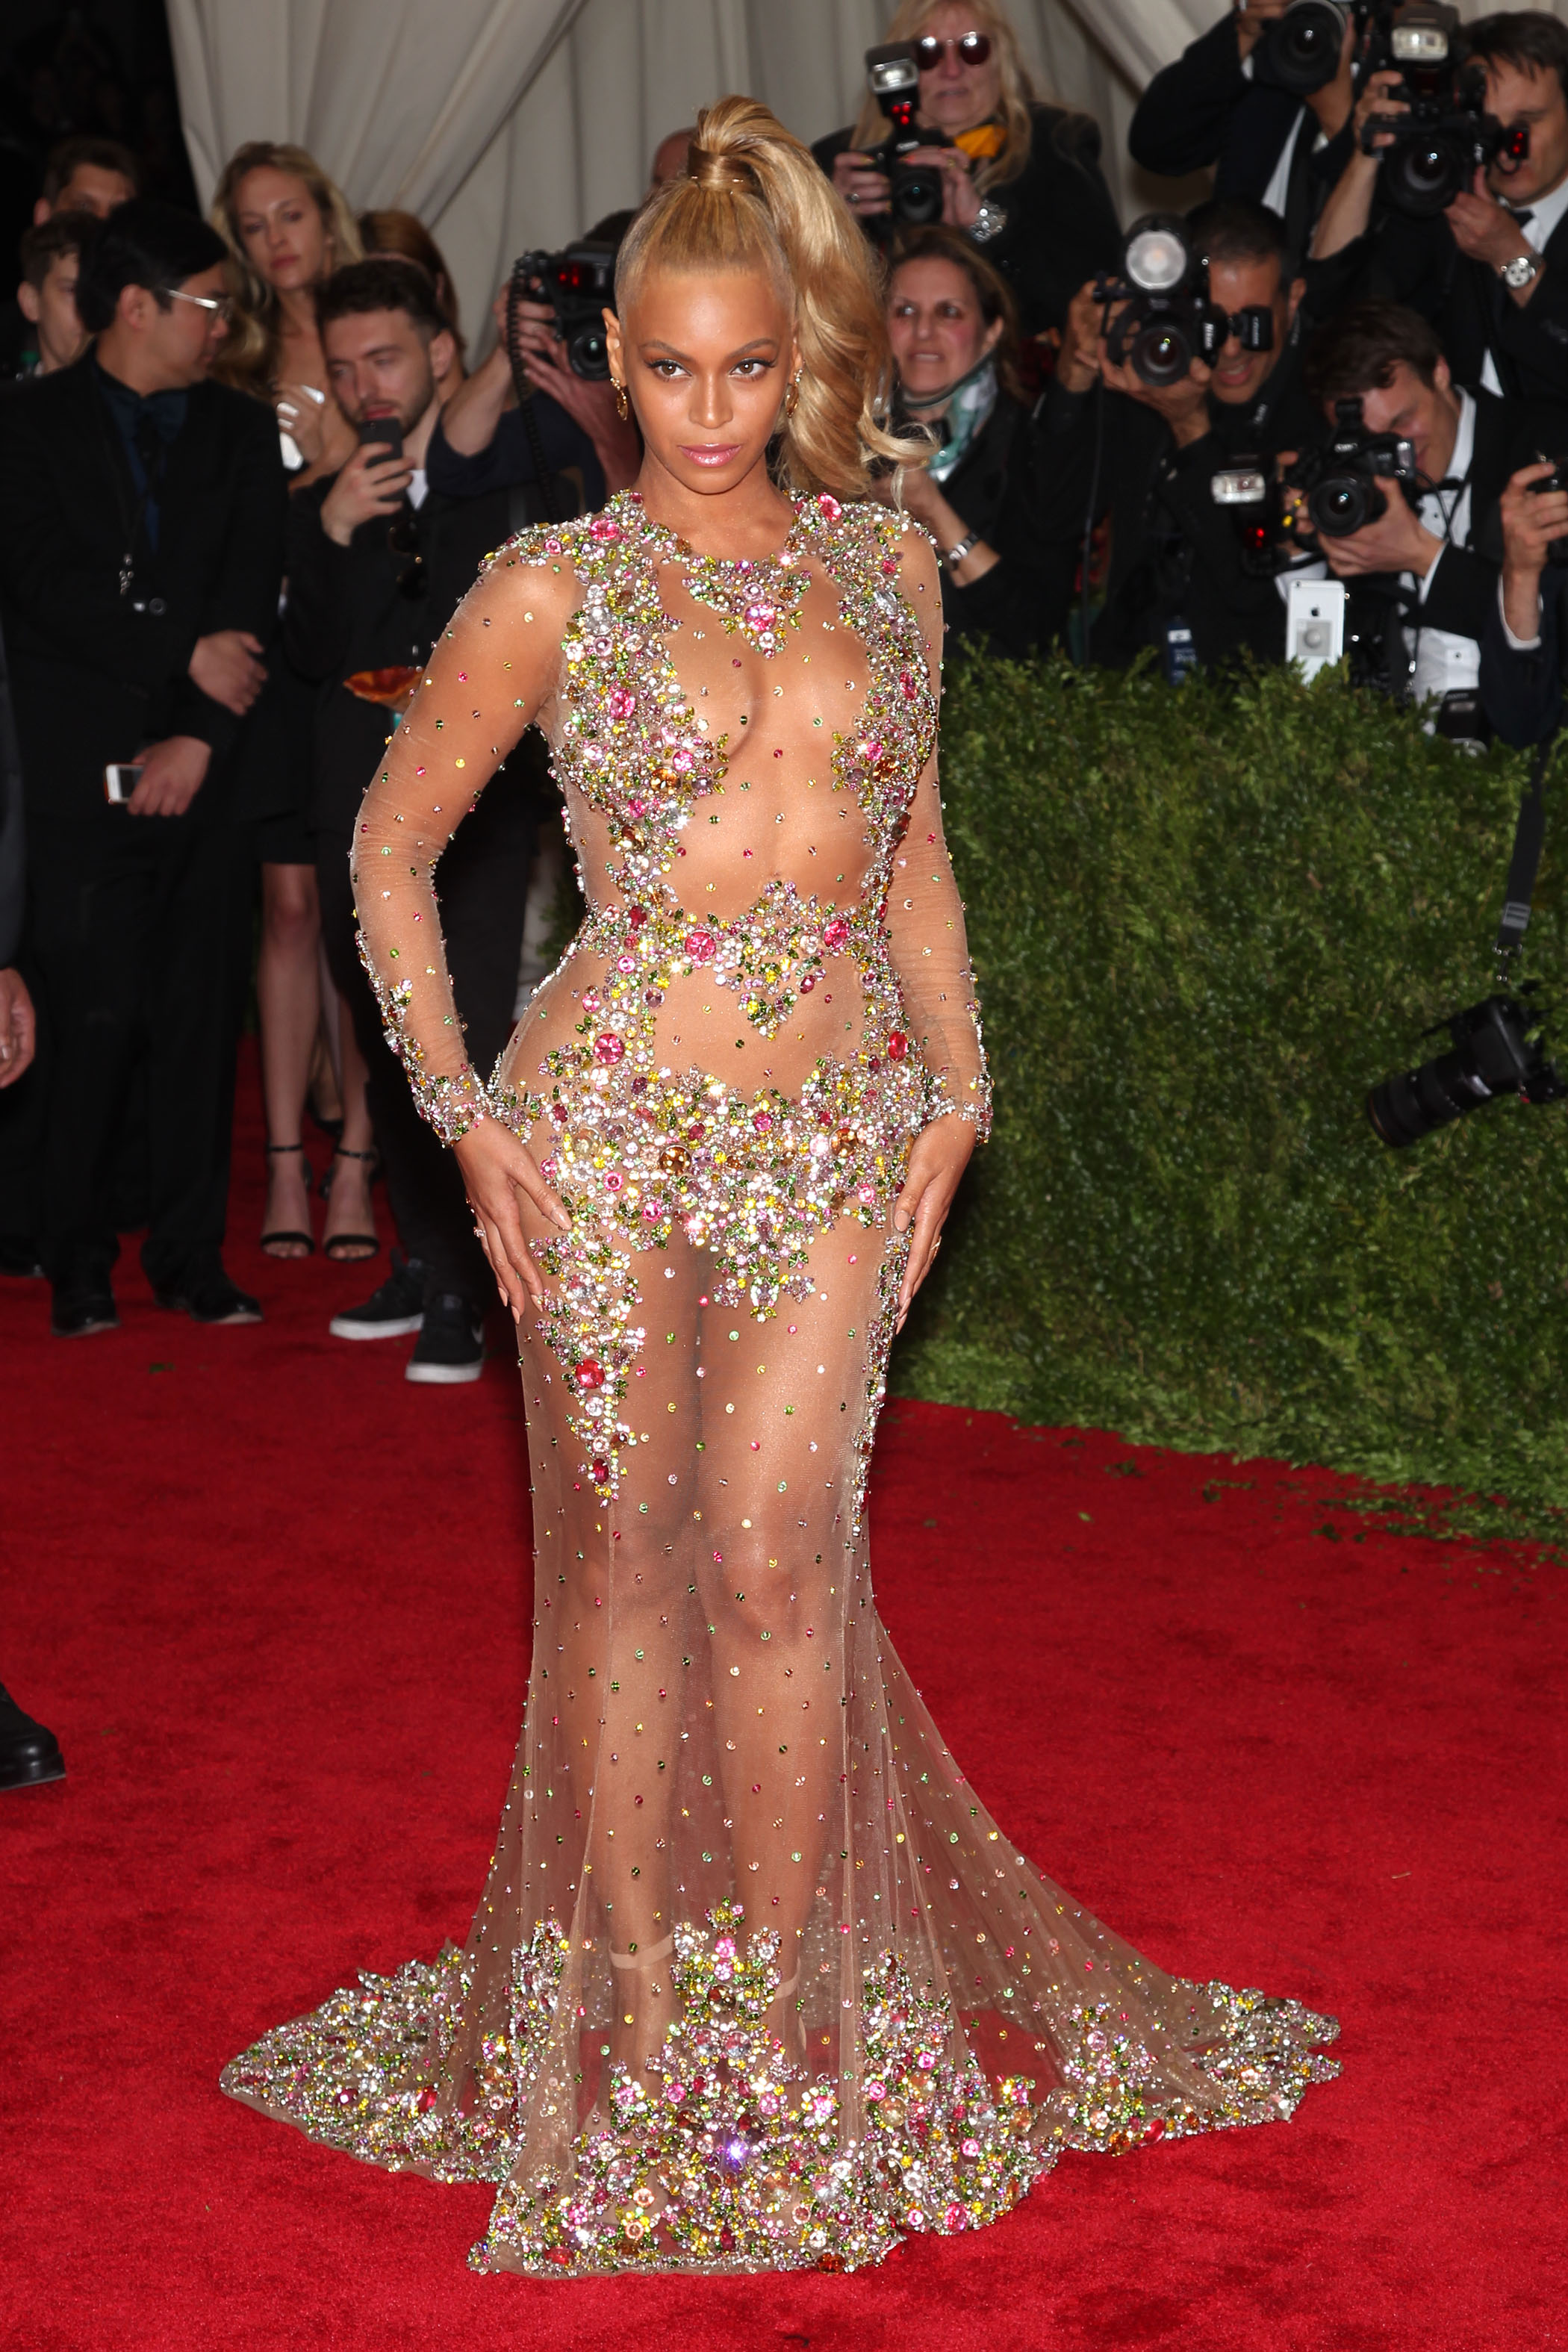 Beyonce (sort of) bares her boobs for the world to see